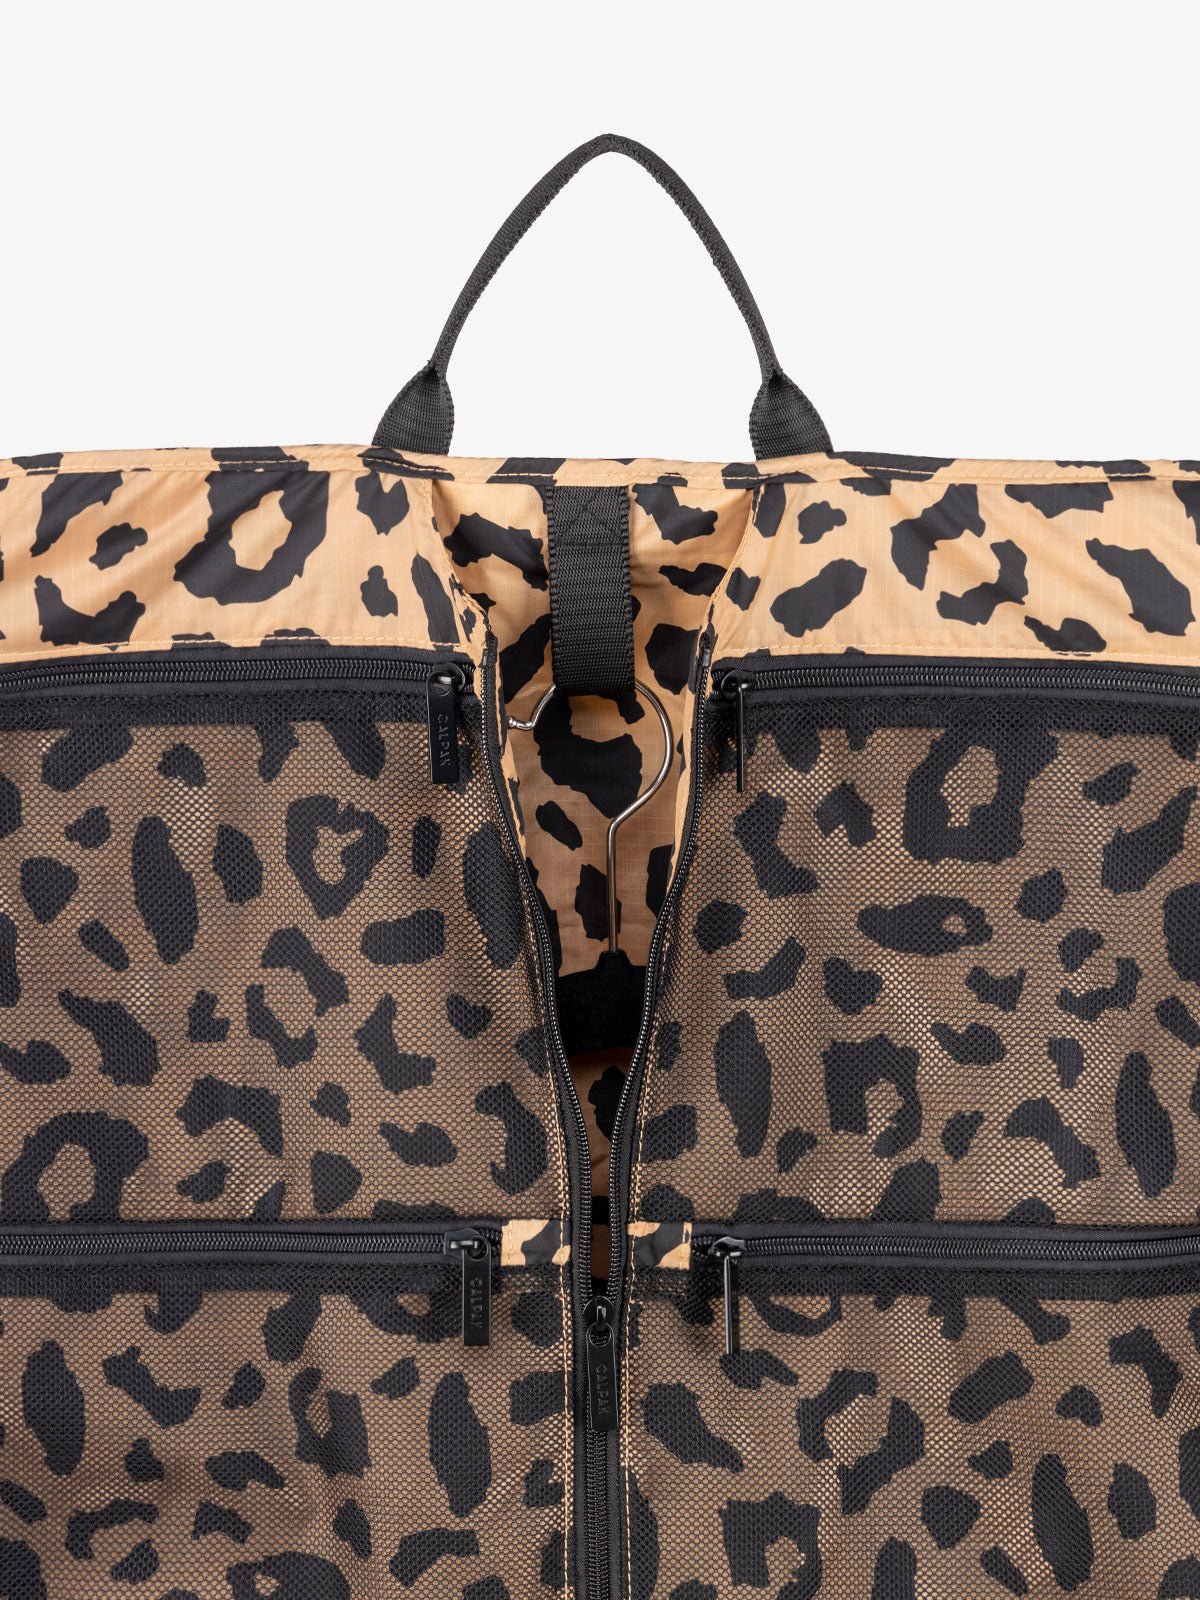 travel bag for clothes and garments in cheetah